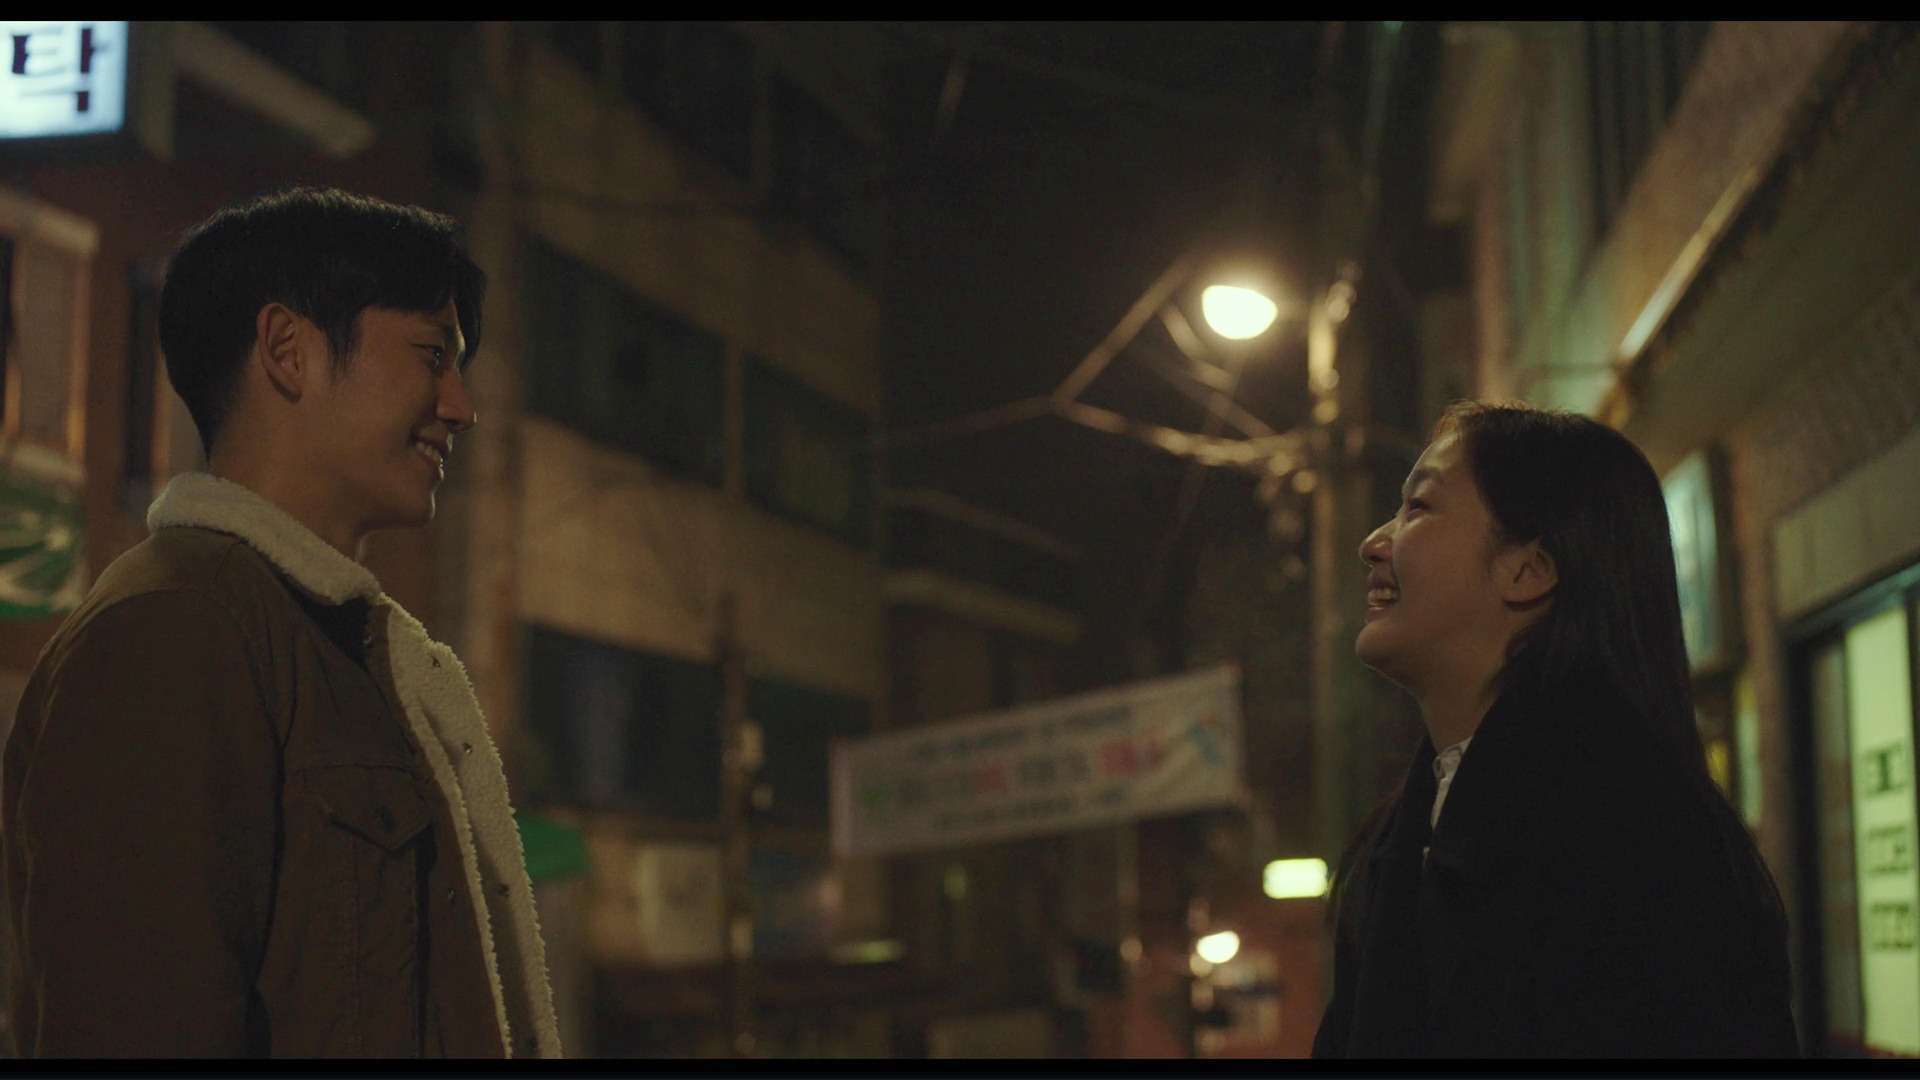 [Movie Review] Timing, trust, and true love in Tune in for Love